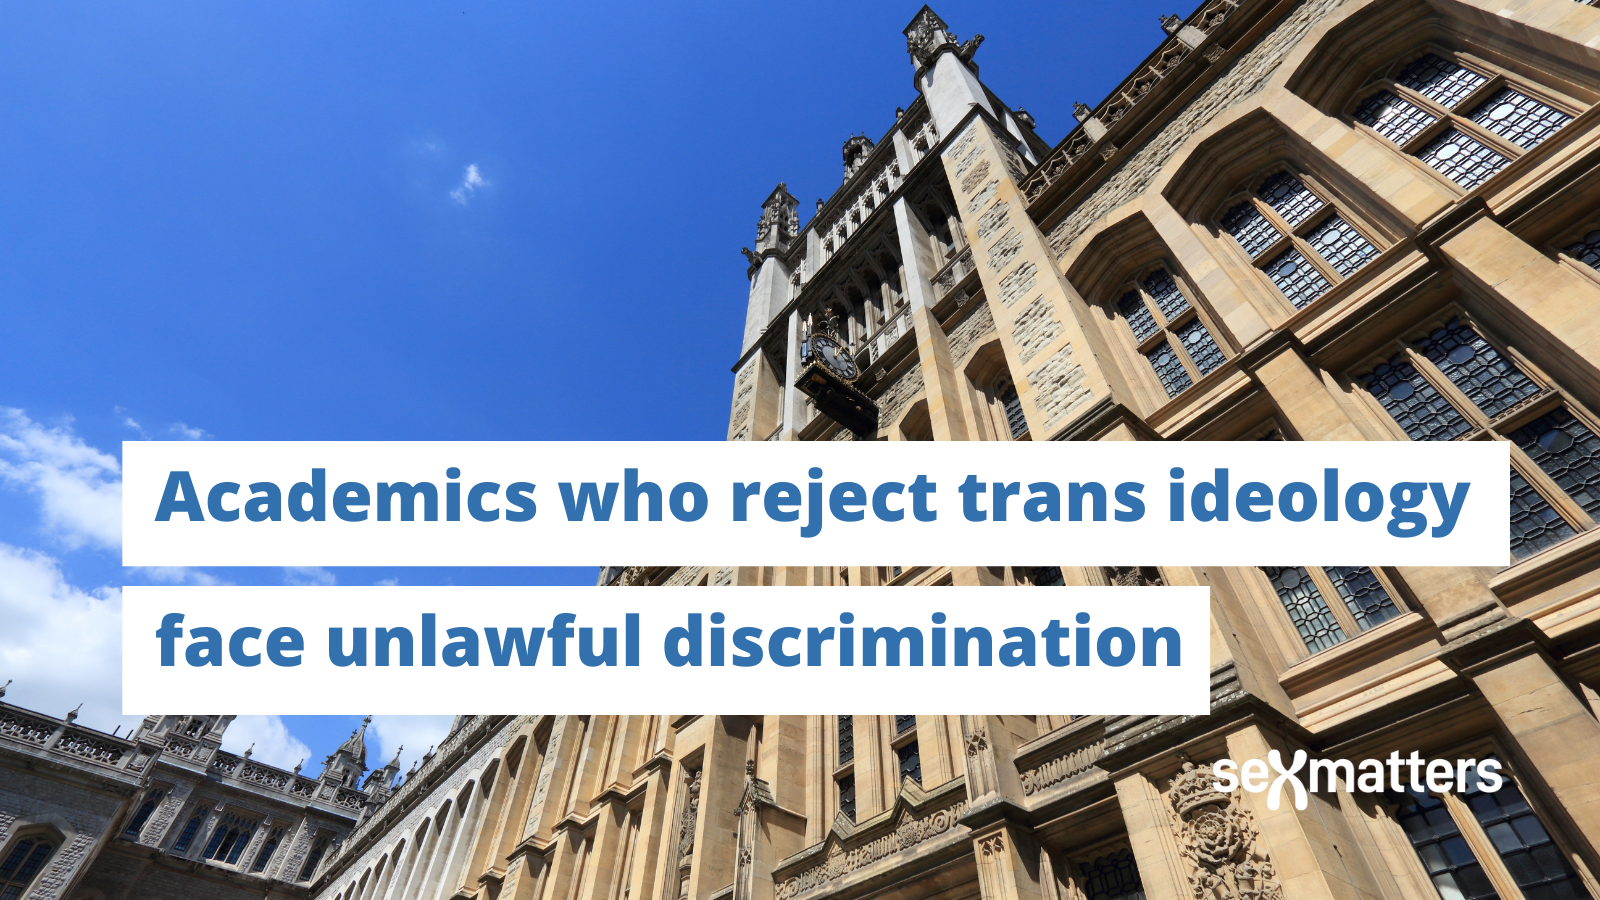 Academics who reject trans ideology face unlawful discrimination